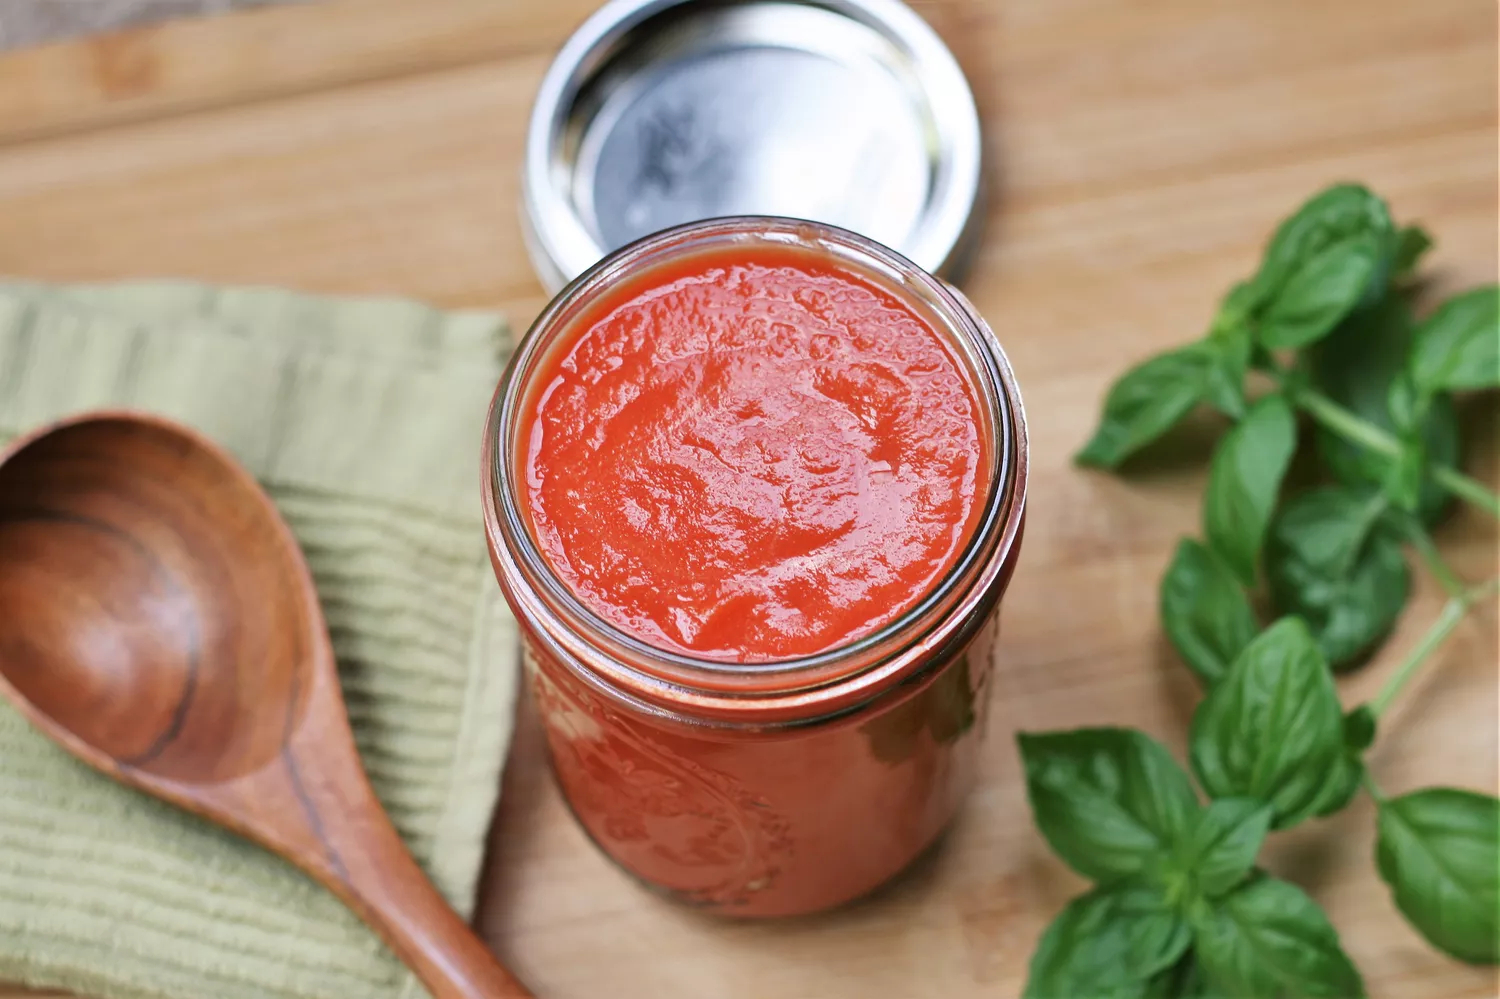 How To Blend Tomatoes Without A Blender